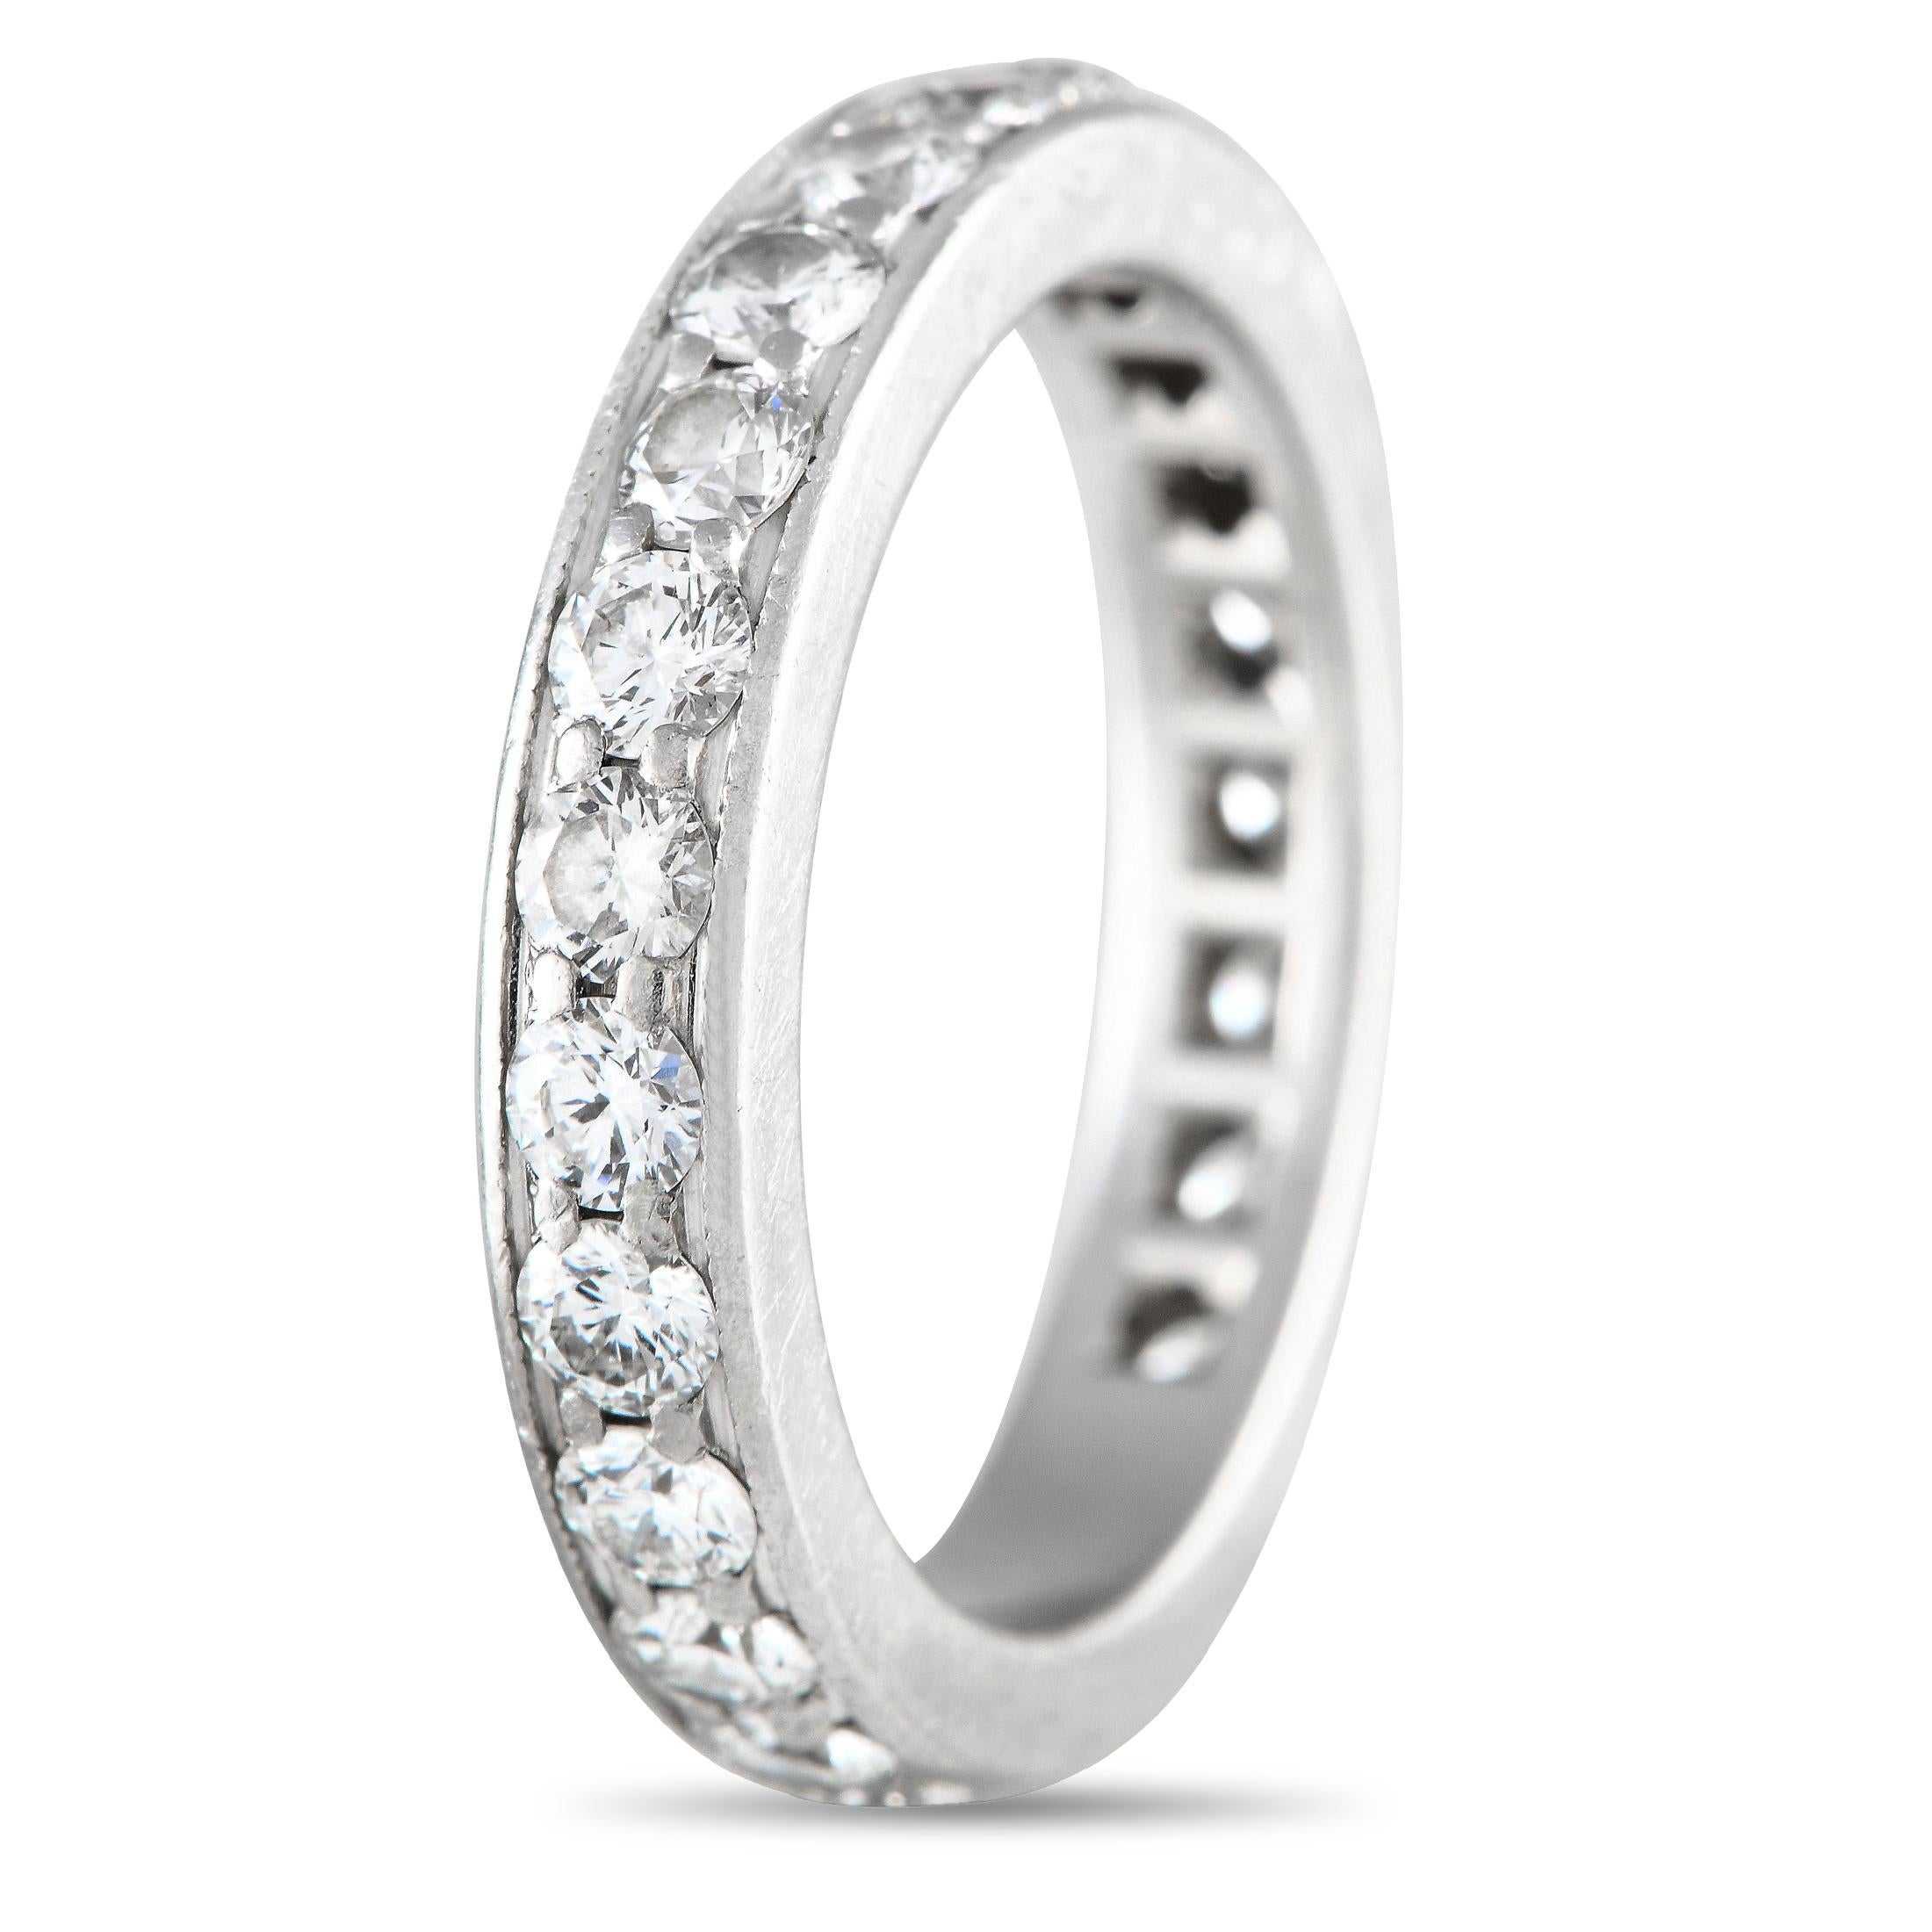 The perfect token of eternal love. This Tiffany & Co. eternity ring has its band crafted in everlasting platinum. Its entire circumference is meticulously detailed with high-quality diamonds. The ring's top dimensions measure 15mm by 3mm.

This